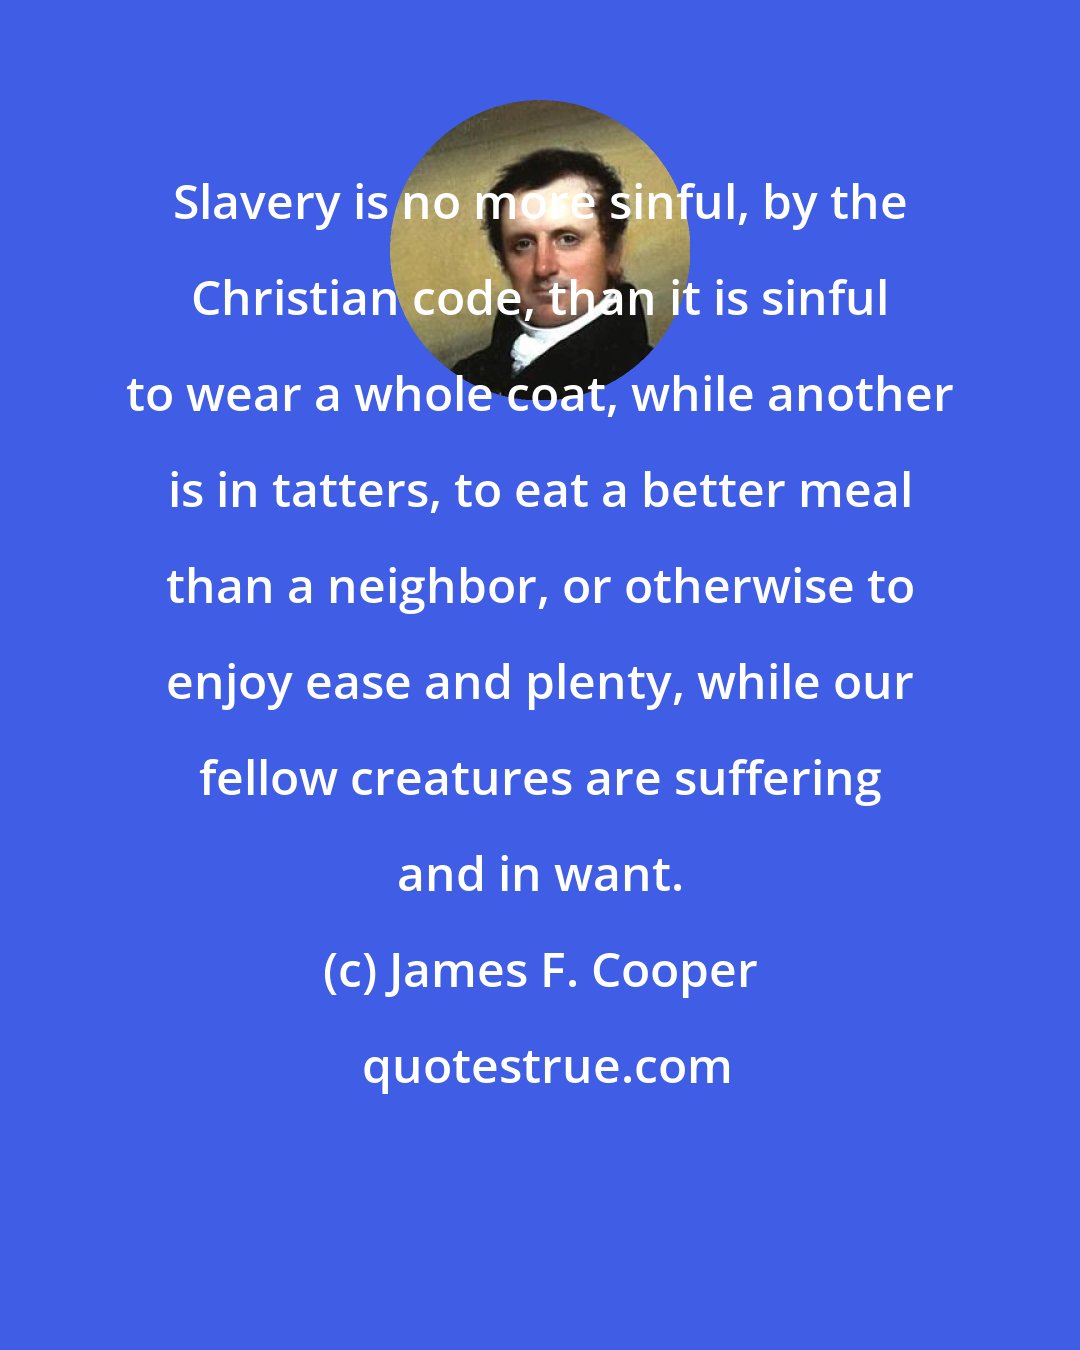 James F. Cooper: Slavery is no more sinful, by the Christian code, than it is sinful to wear a whole coat, while another is in tatters, to eat a better meal than a neighbor, or otherwise to enjoy ease and plenty, while our fellow creatures are suffering and in want.